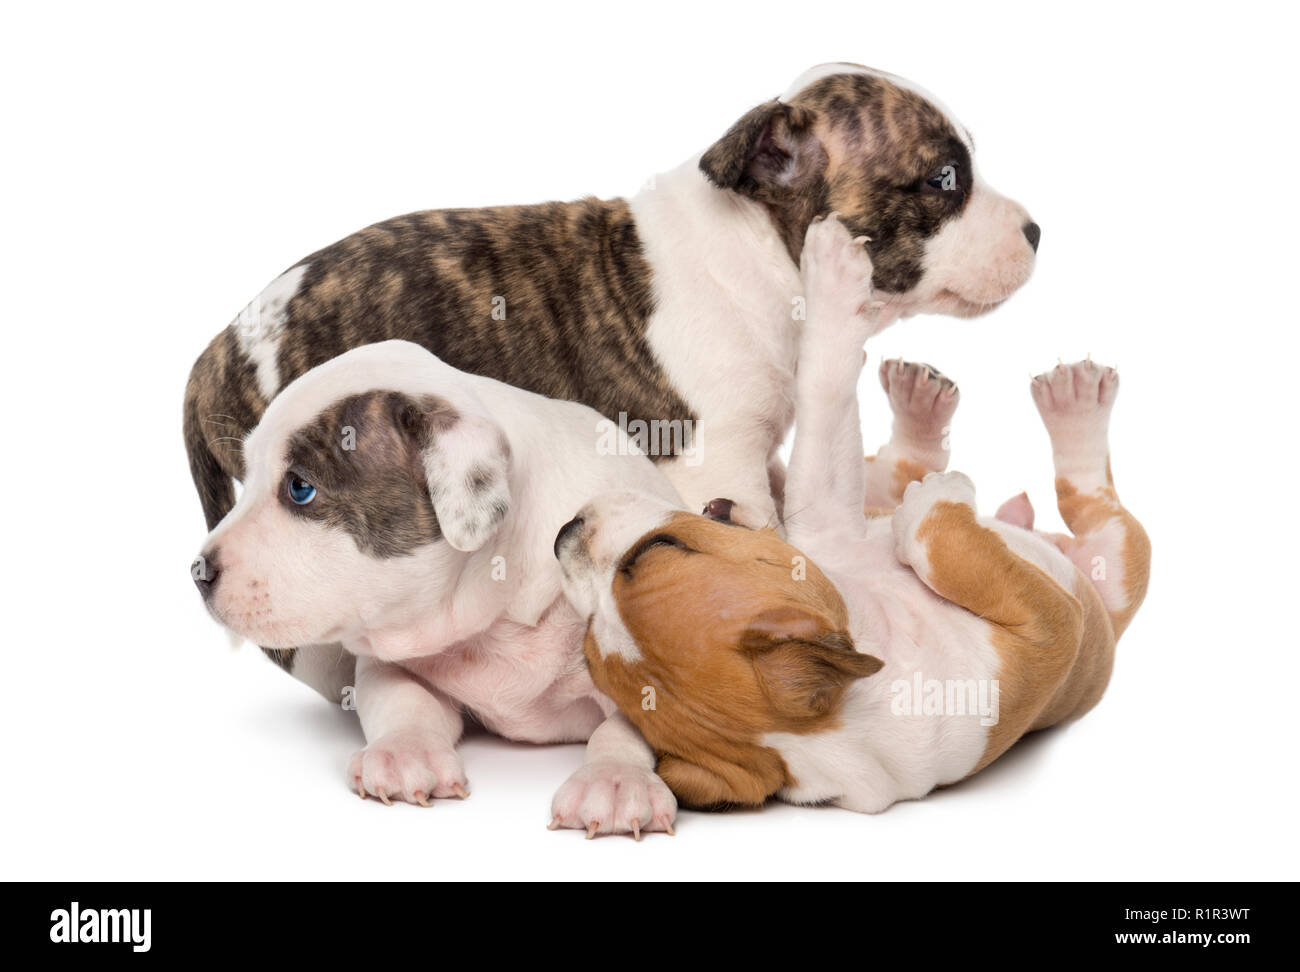 American Staffordshire Terrier Puppies playing, 6 weeks old, against white background Stock Photo